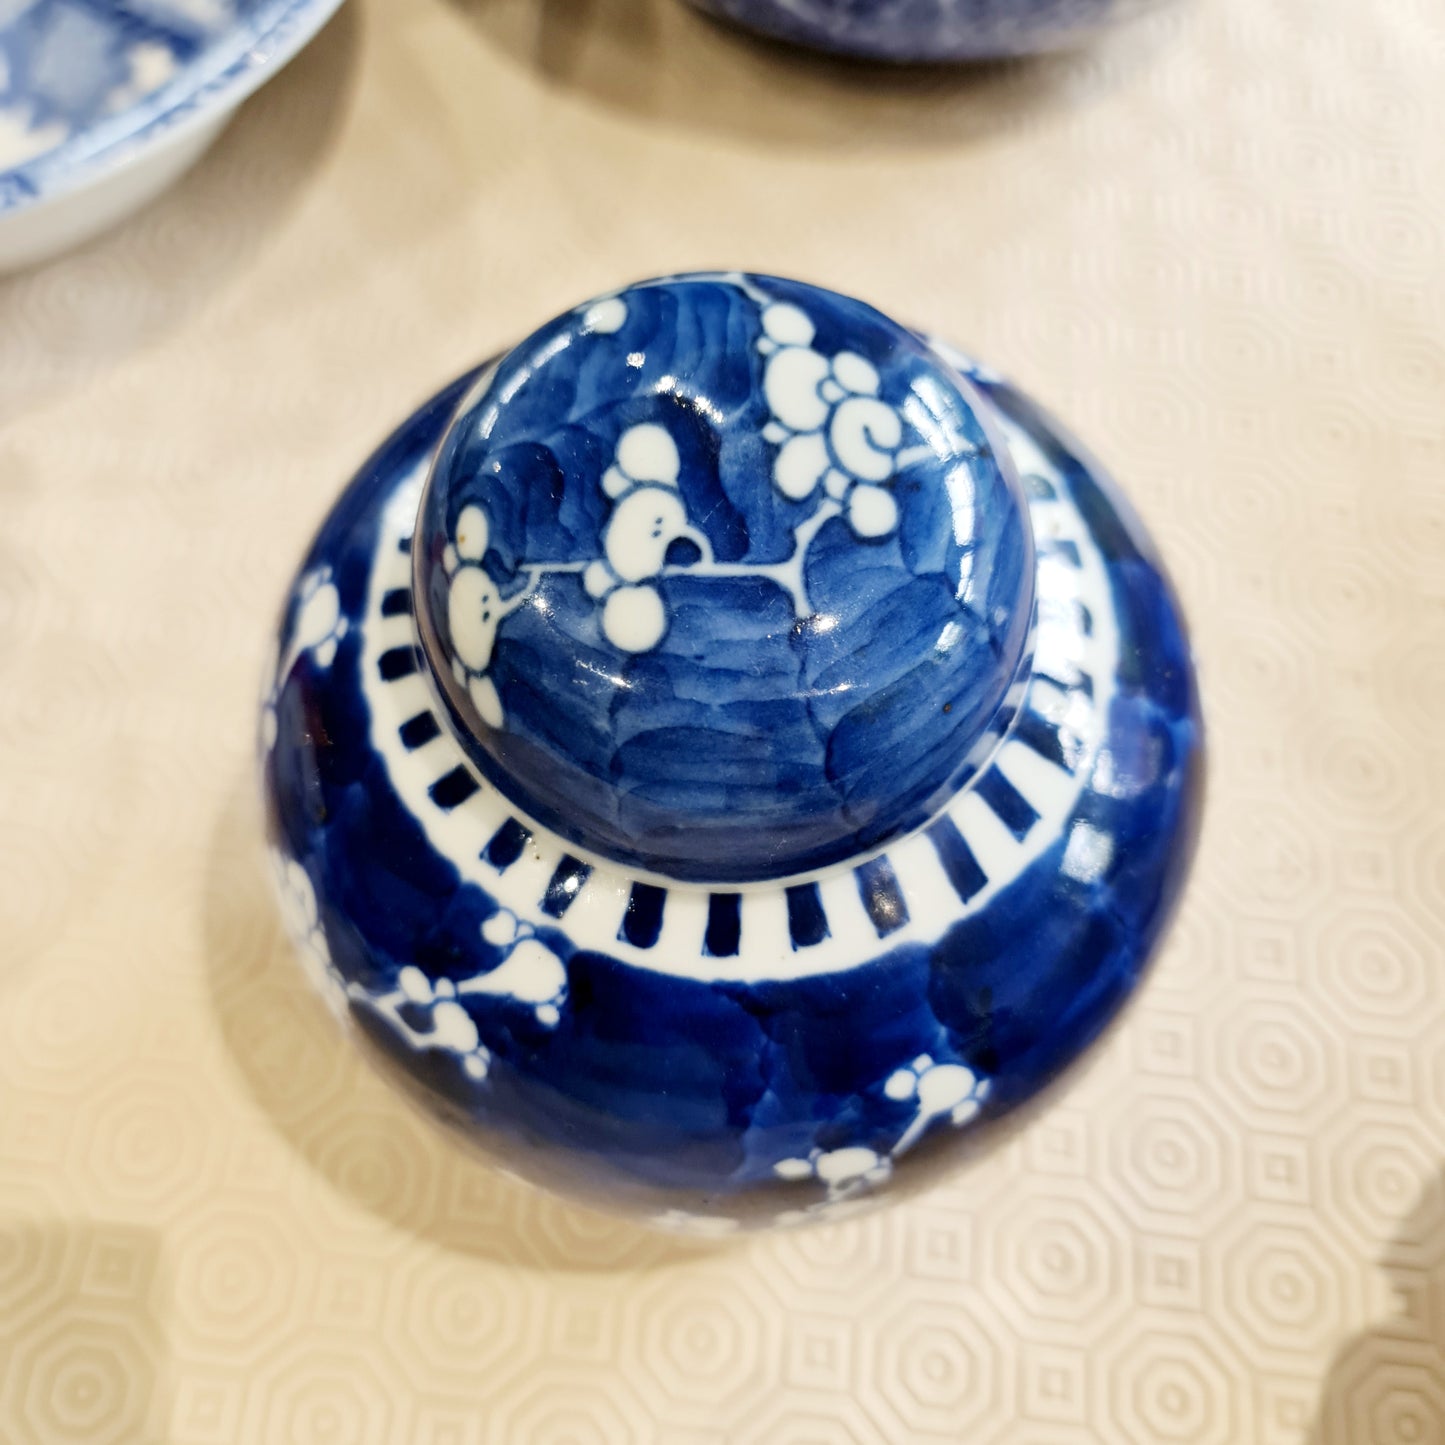 19th century Chinese blue and white porcelain prunus pattern ginger jar and cover, 19th century, height 21cm, diameter 16.5cm.